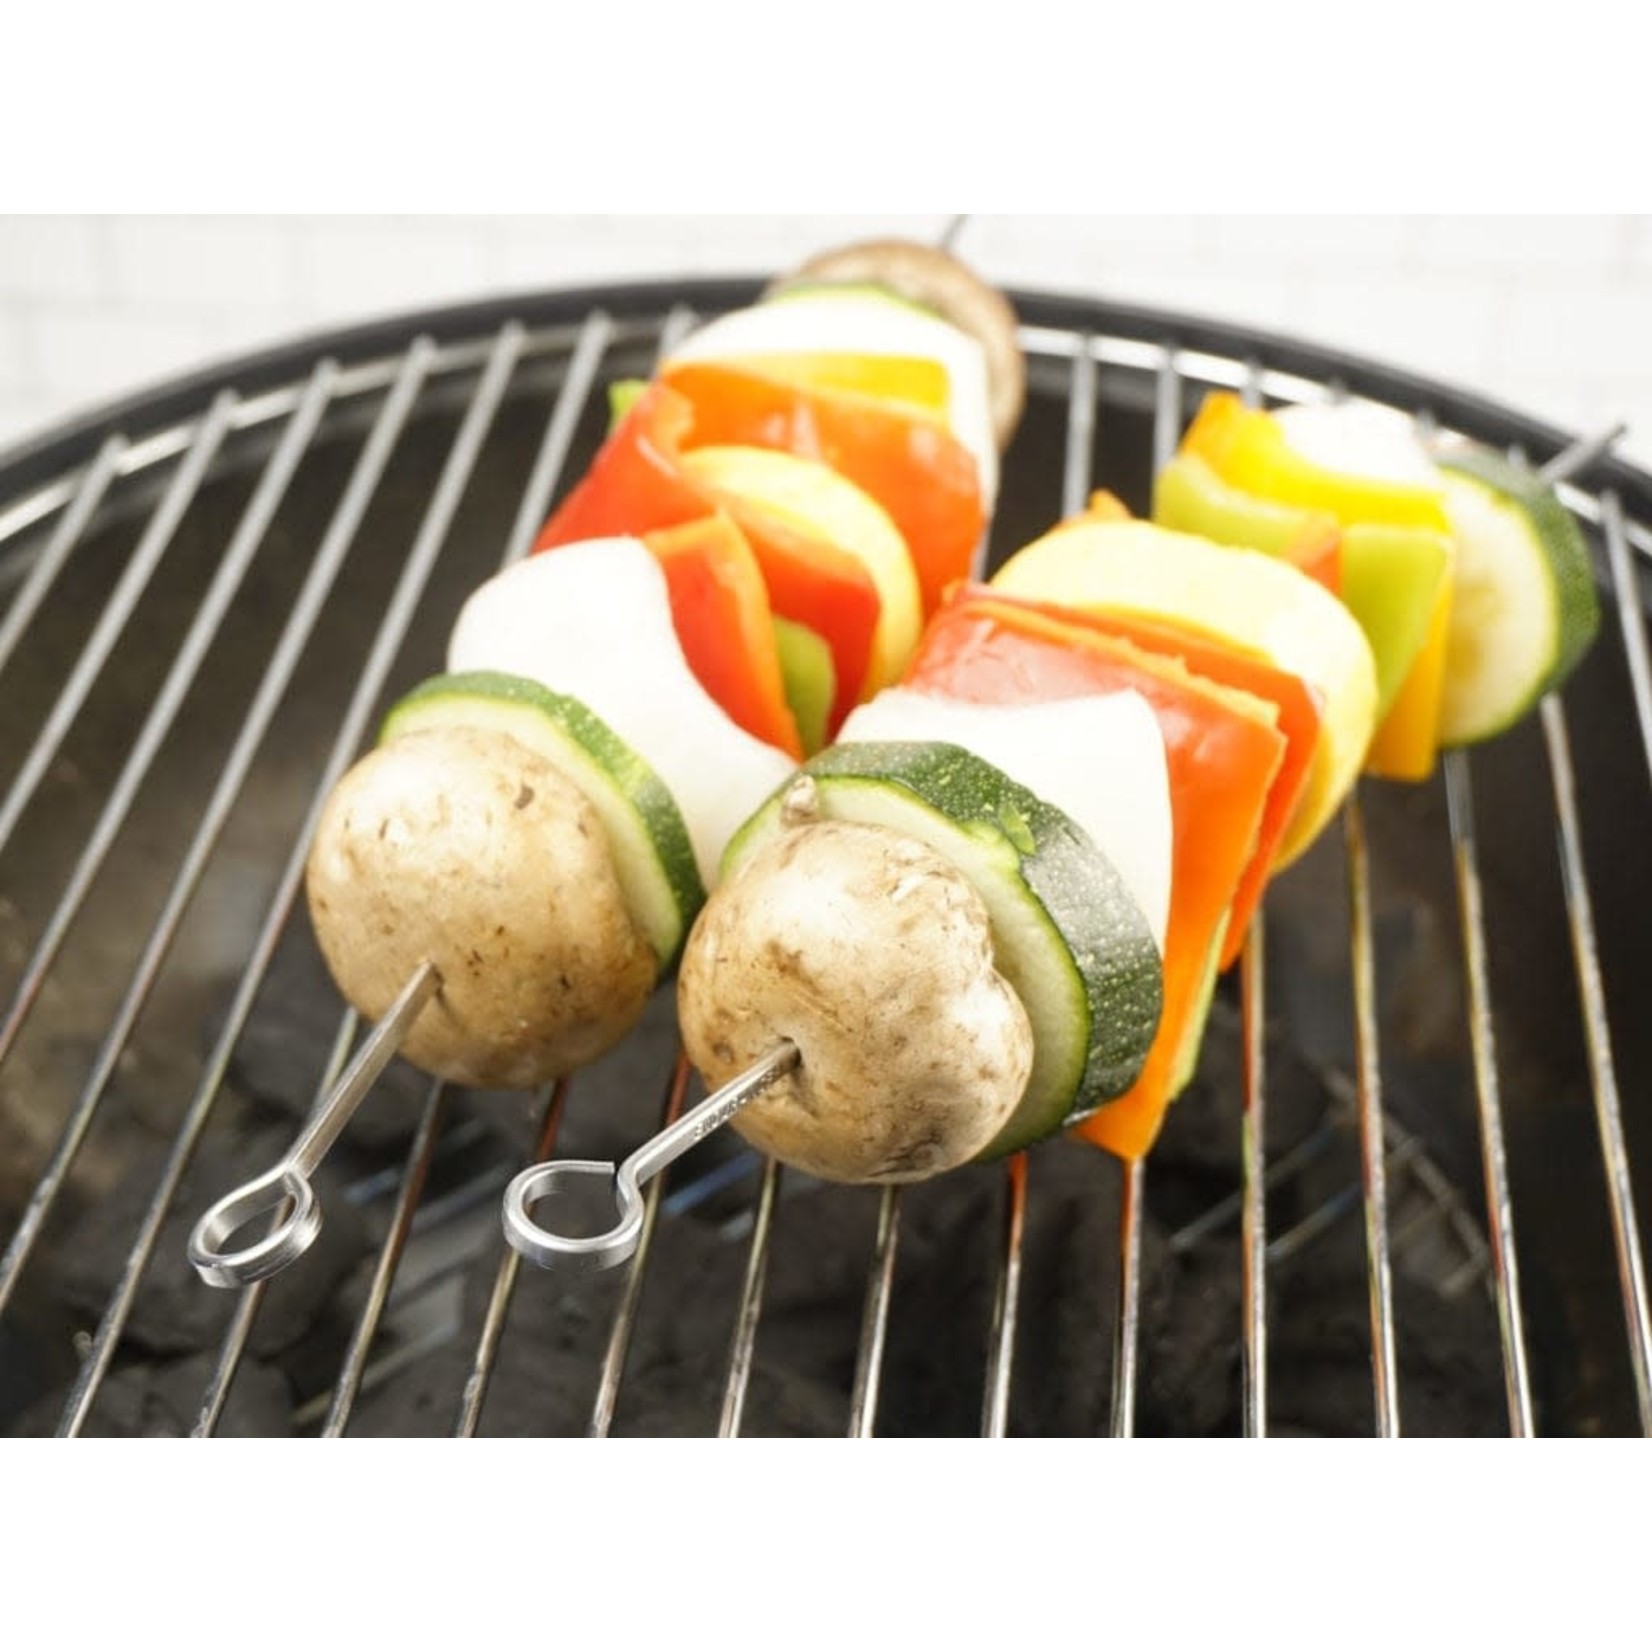 RSVP RSVP BBQ Skewers S/6 - Stainless